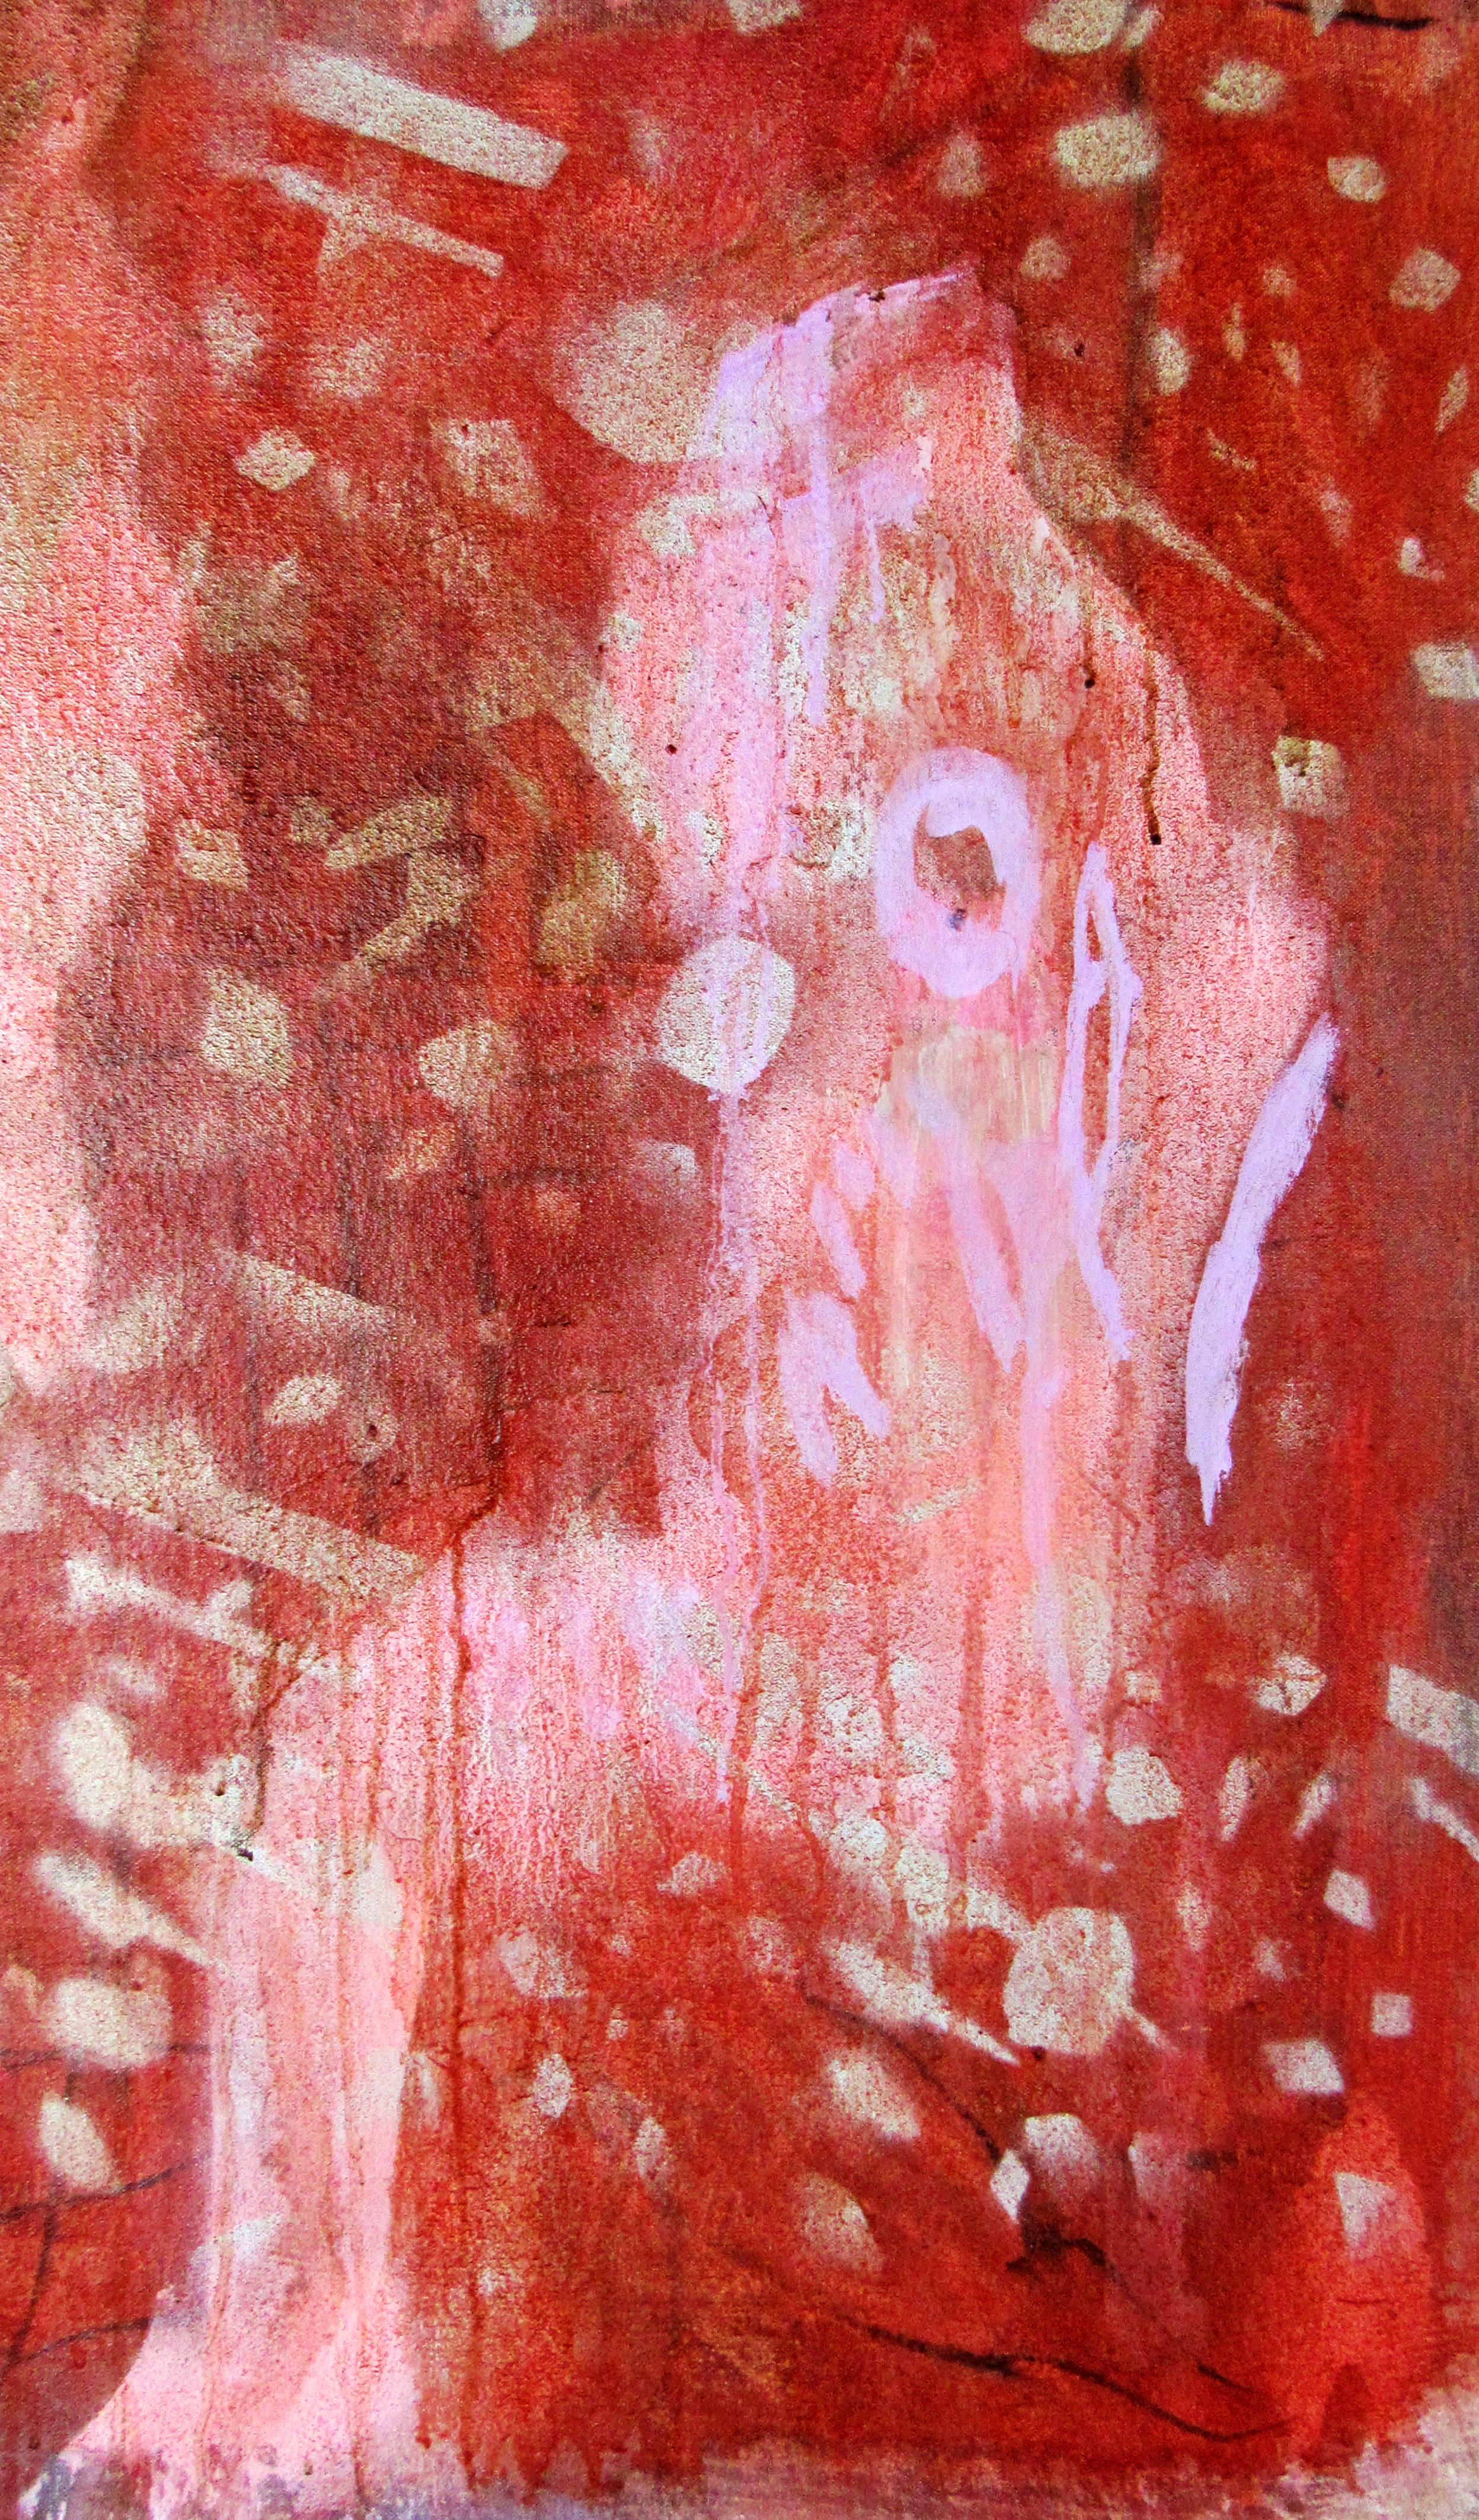 Eurydice, red gestural abstract w figures - Abstract Painting by C. Dimitri